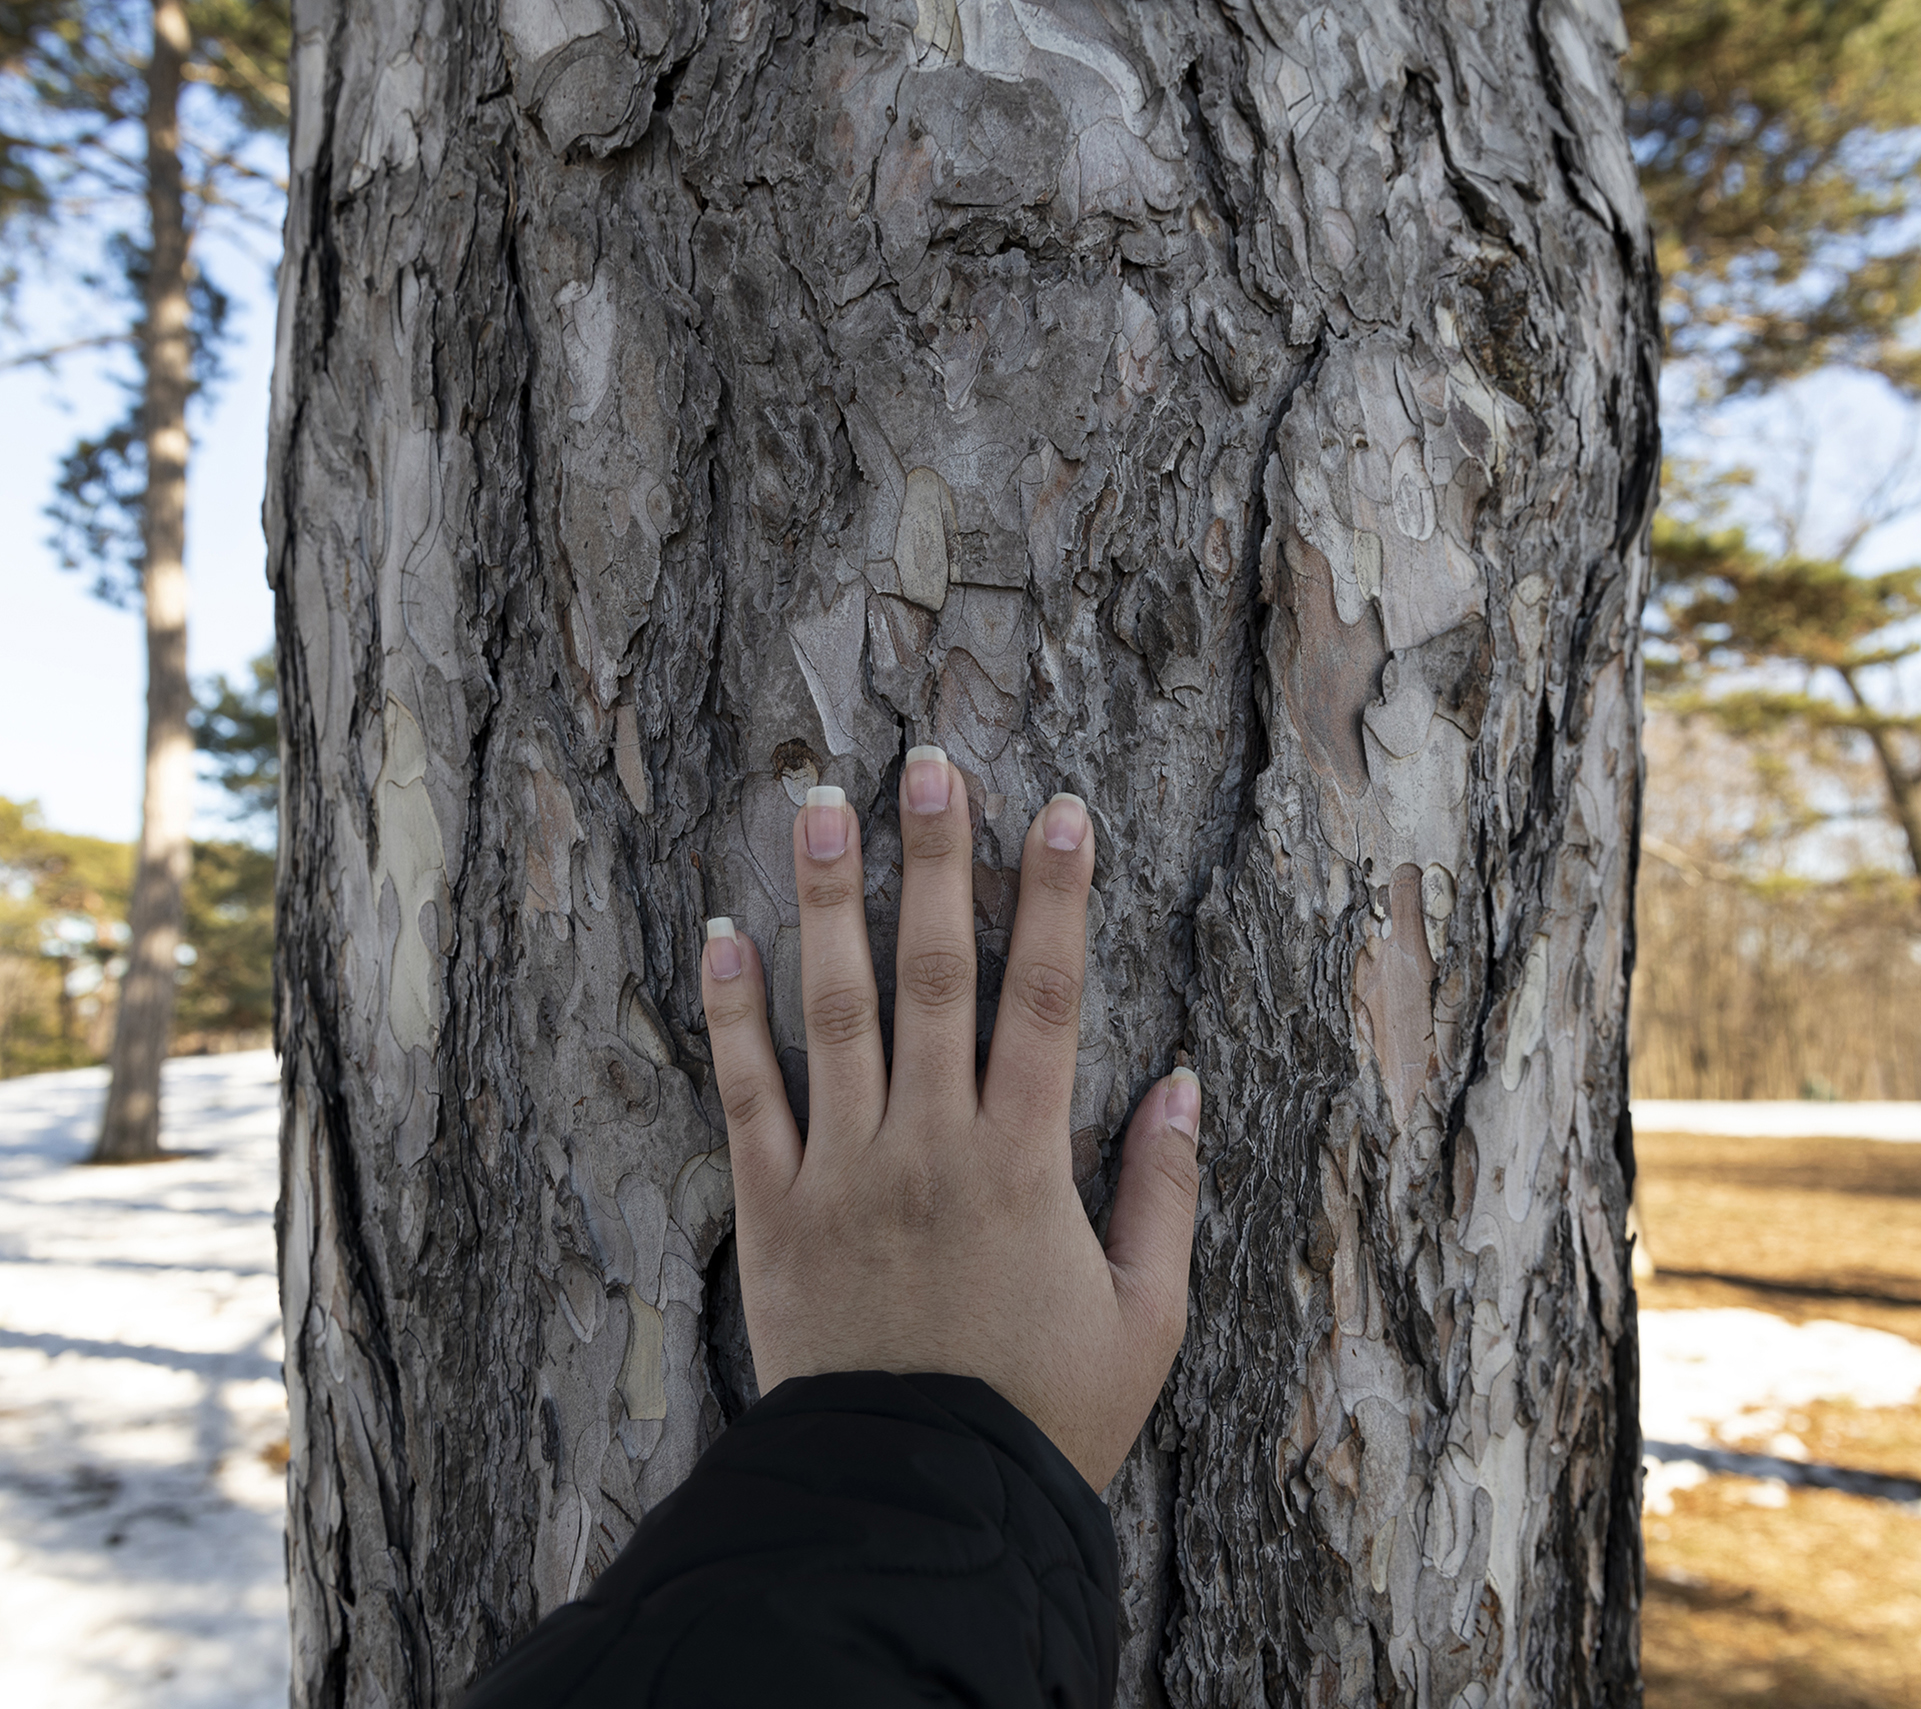 The image consists of a hand touching a tree.